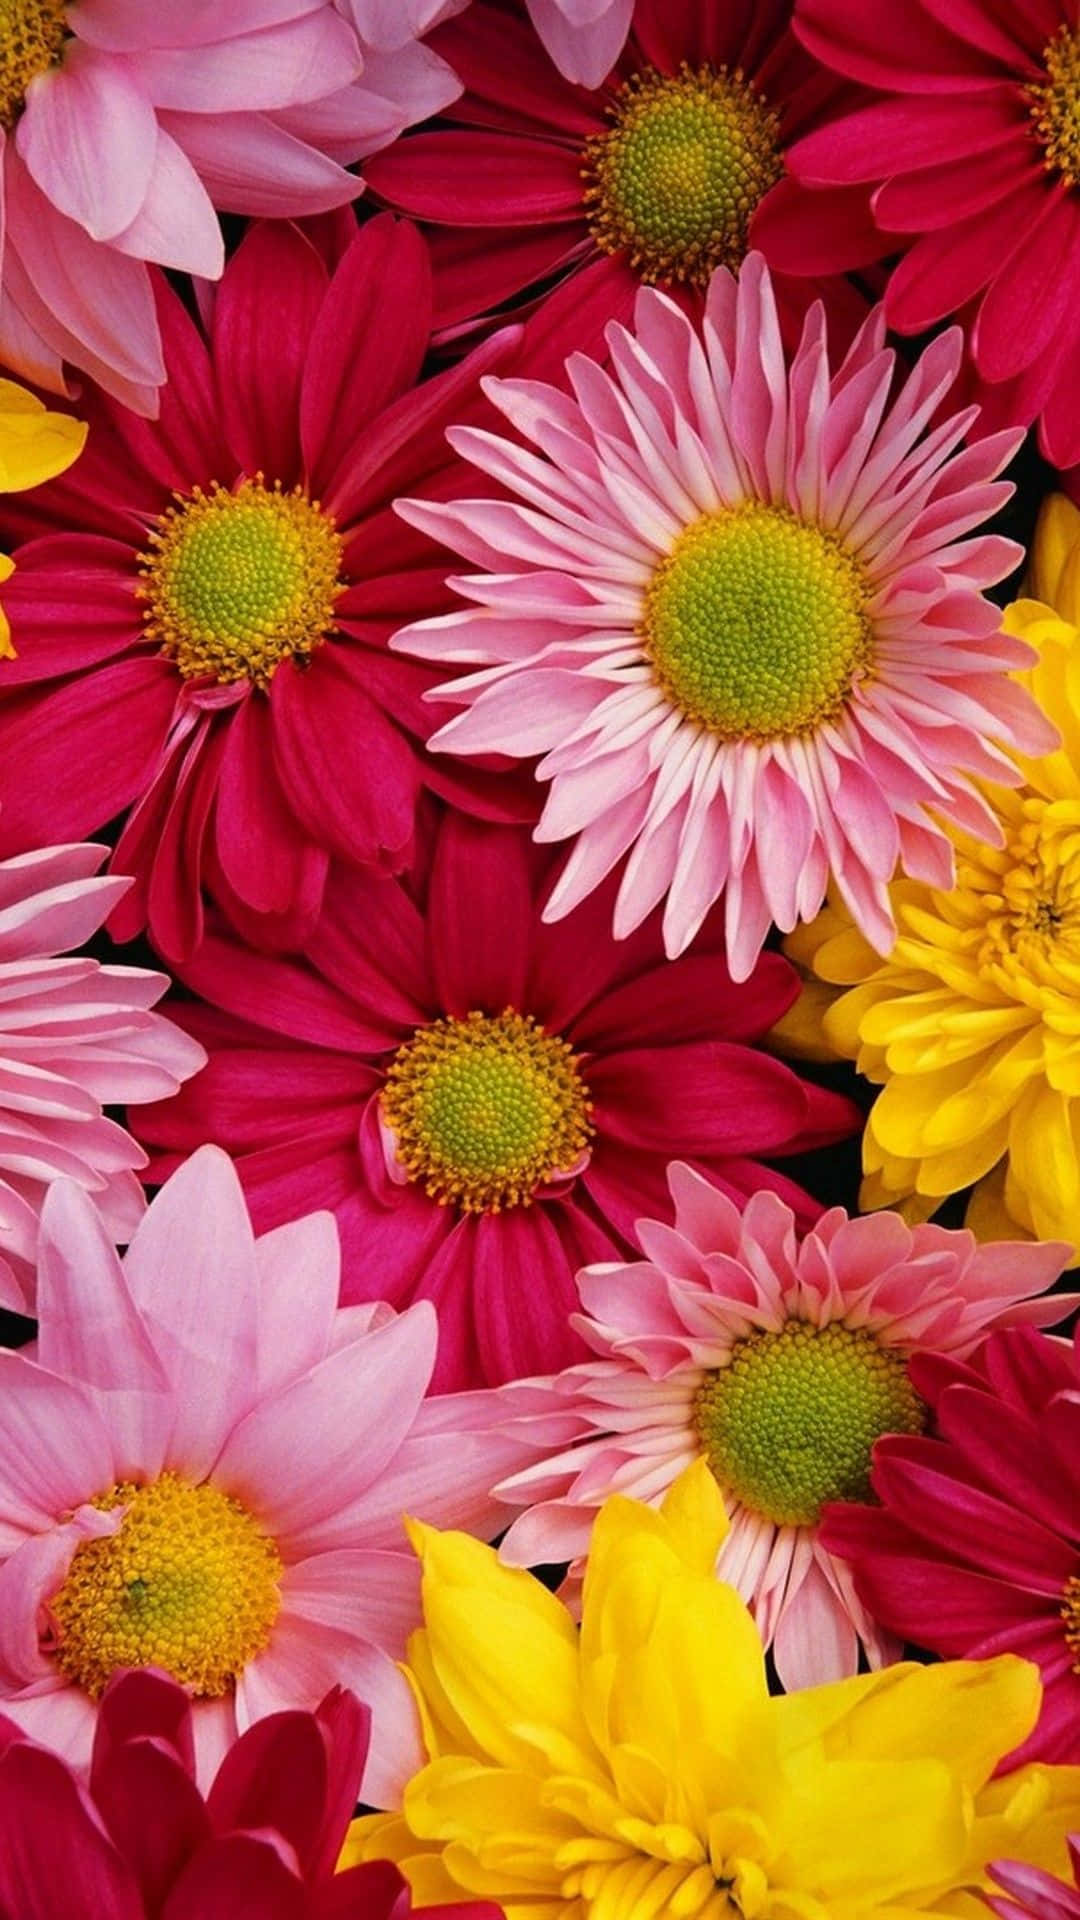 Bright-Colored Spring Daisy iPhone Wallpaper